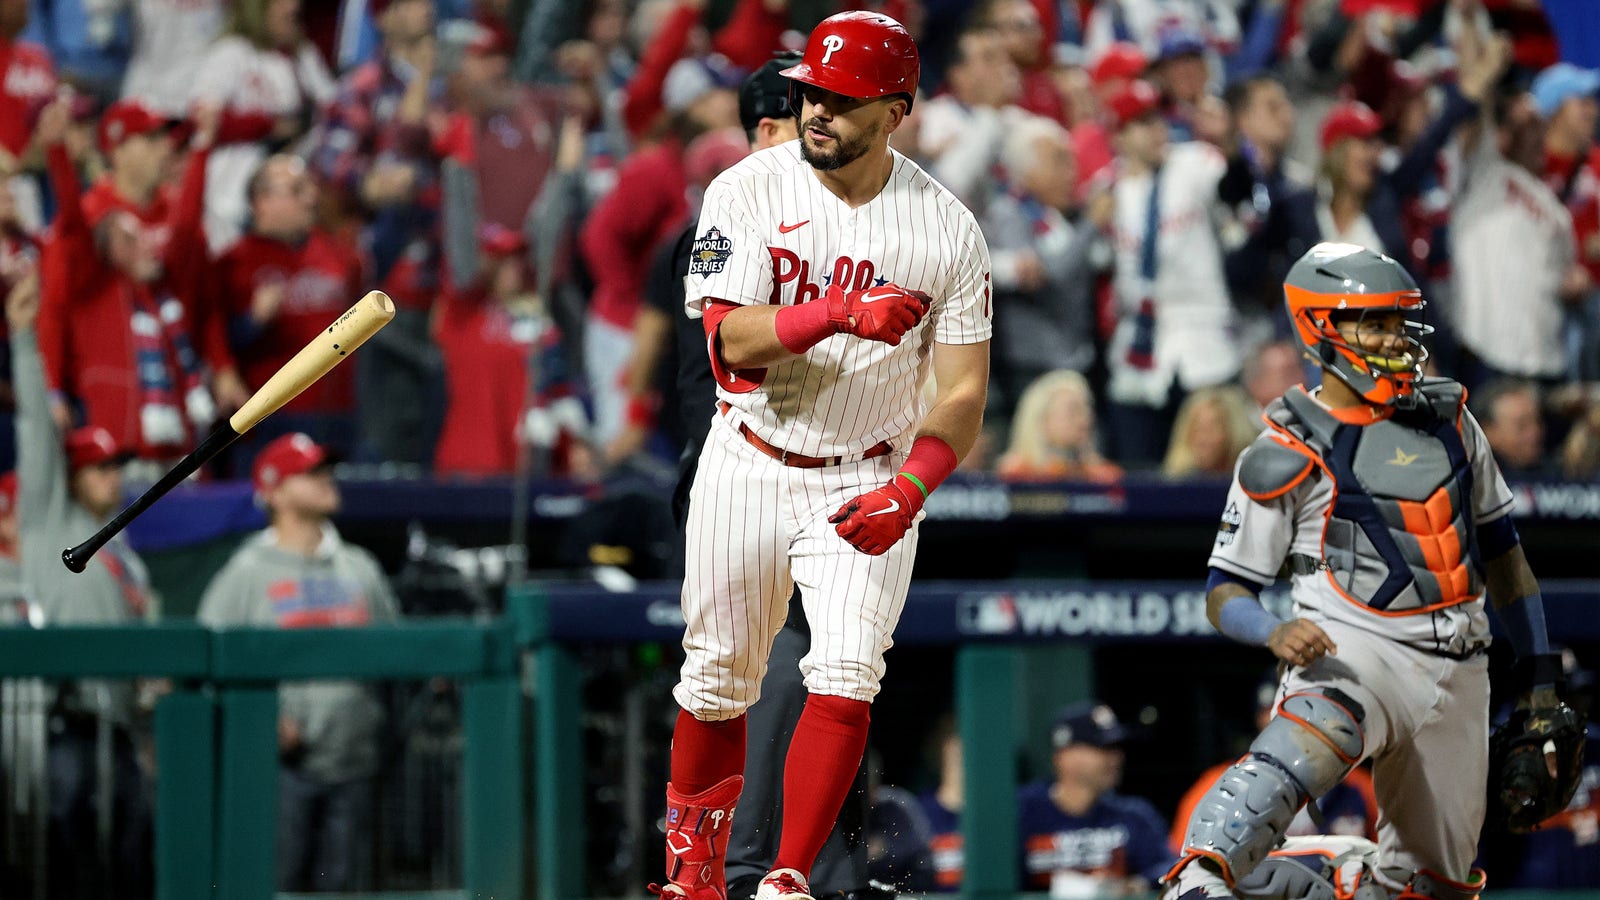 The Phillies make Game 3 of the World Series a home run derby